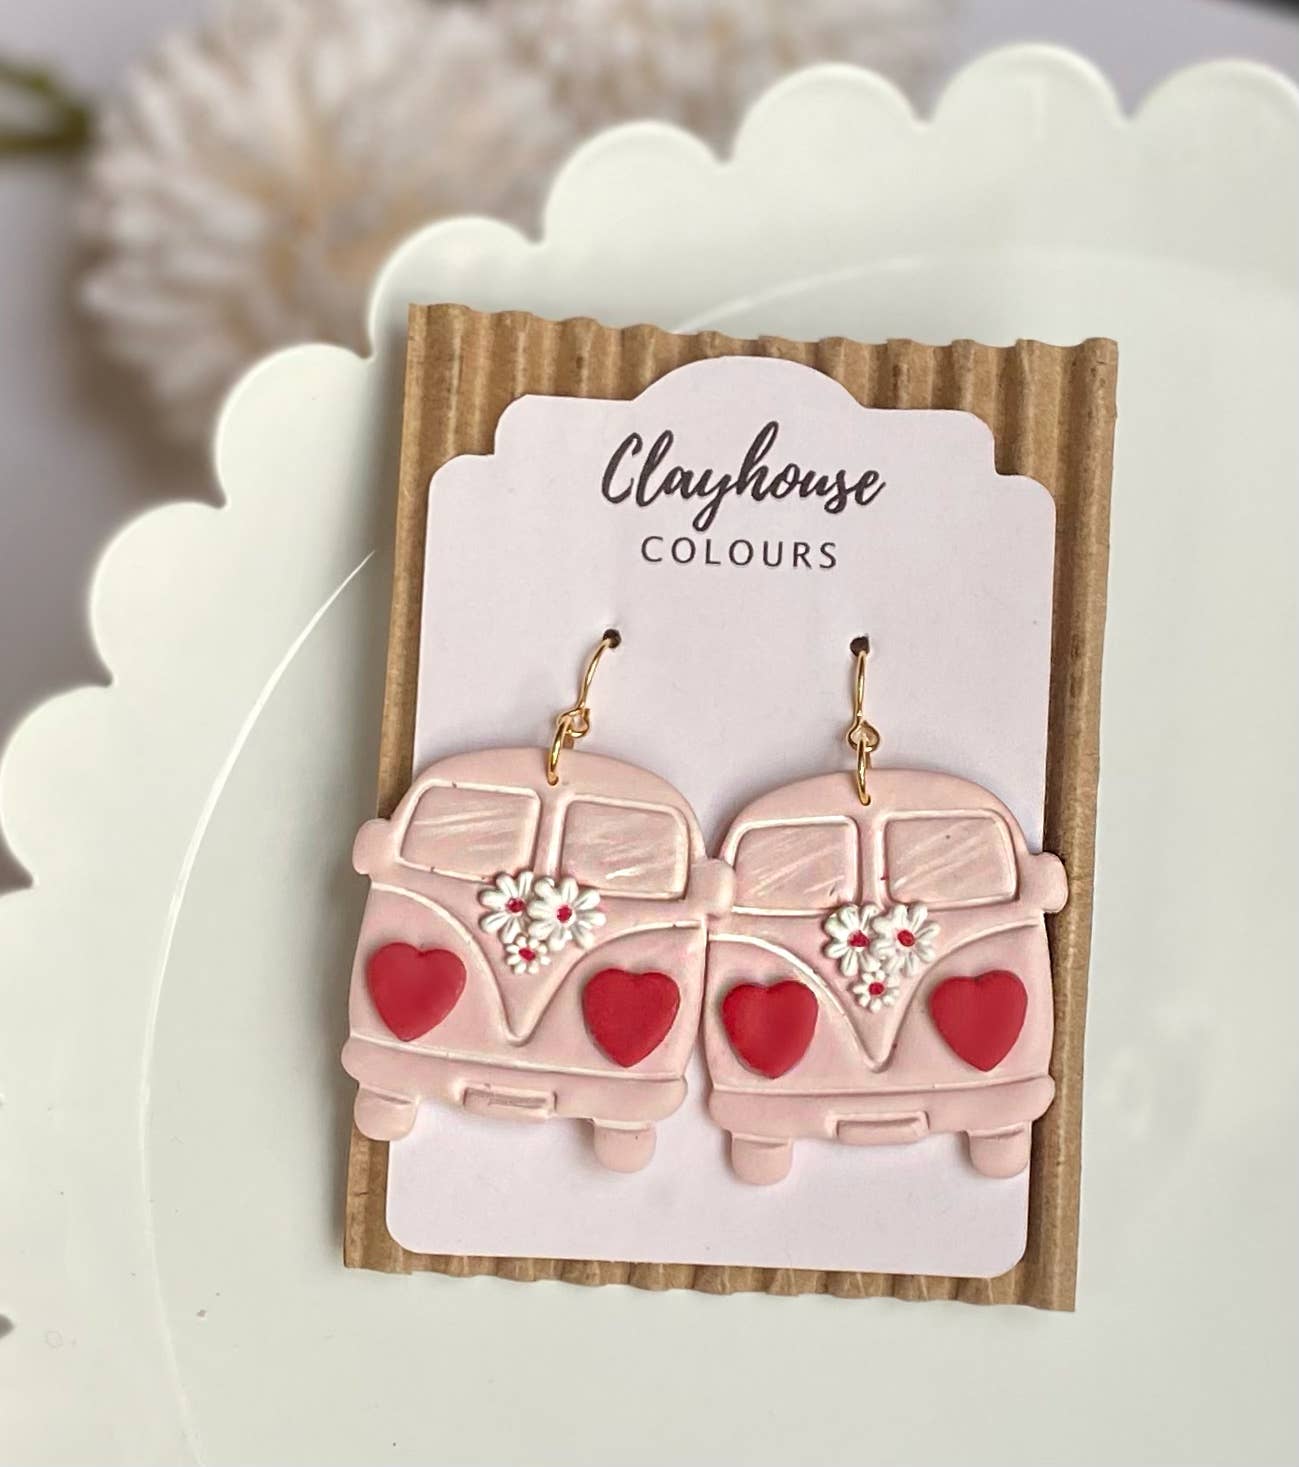 Clayhouse Colours - Groovy Valentine’s Clay Earrings